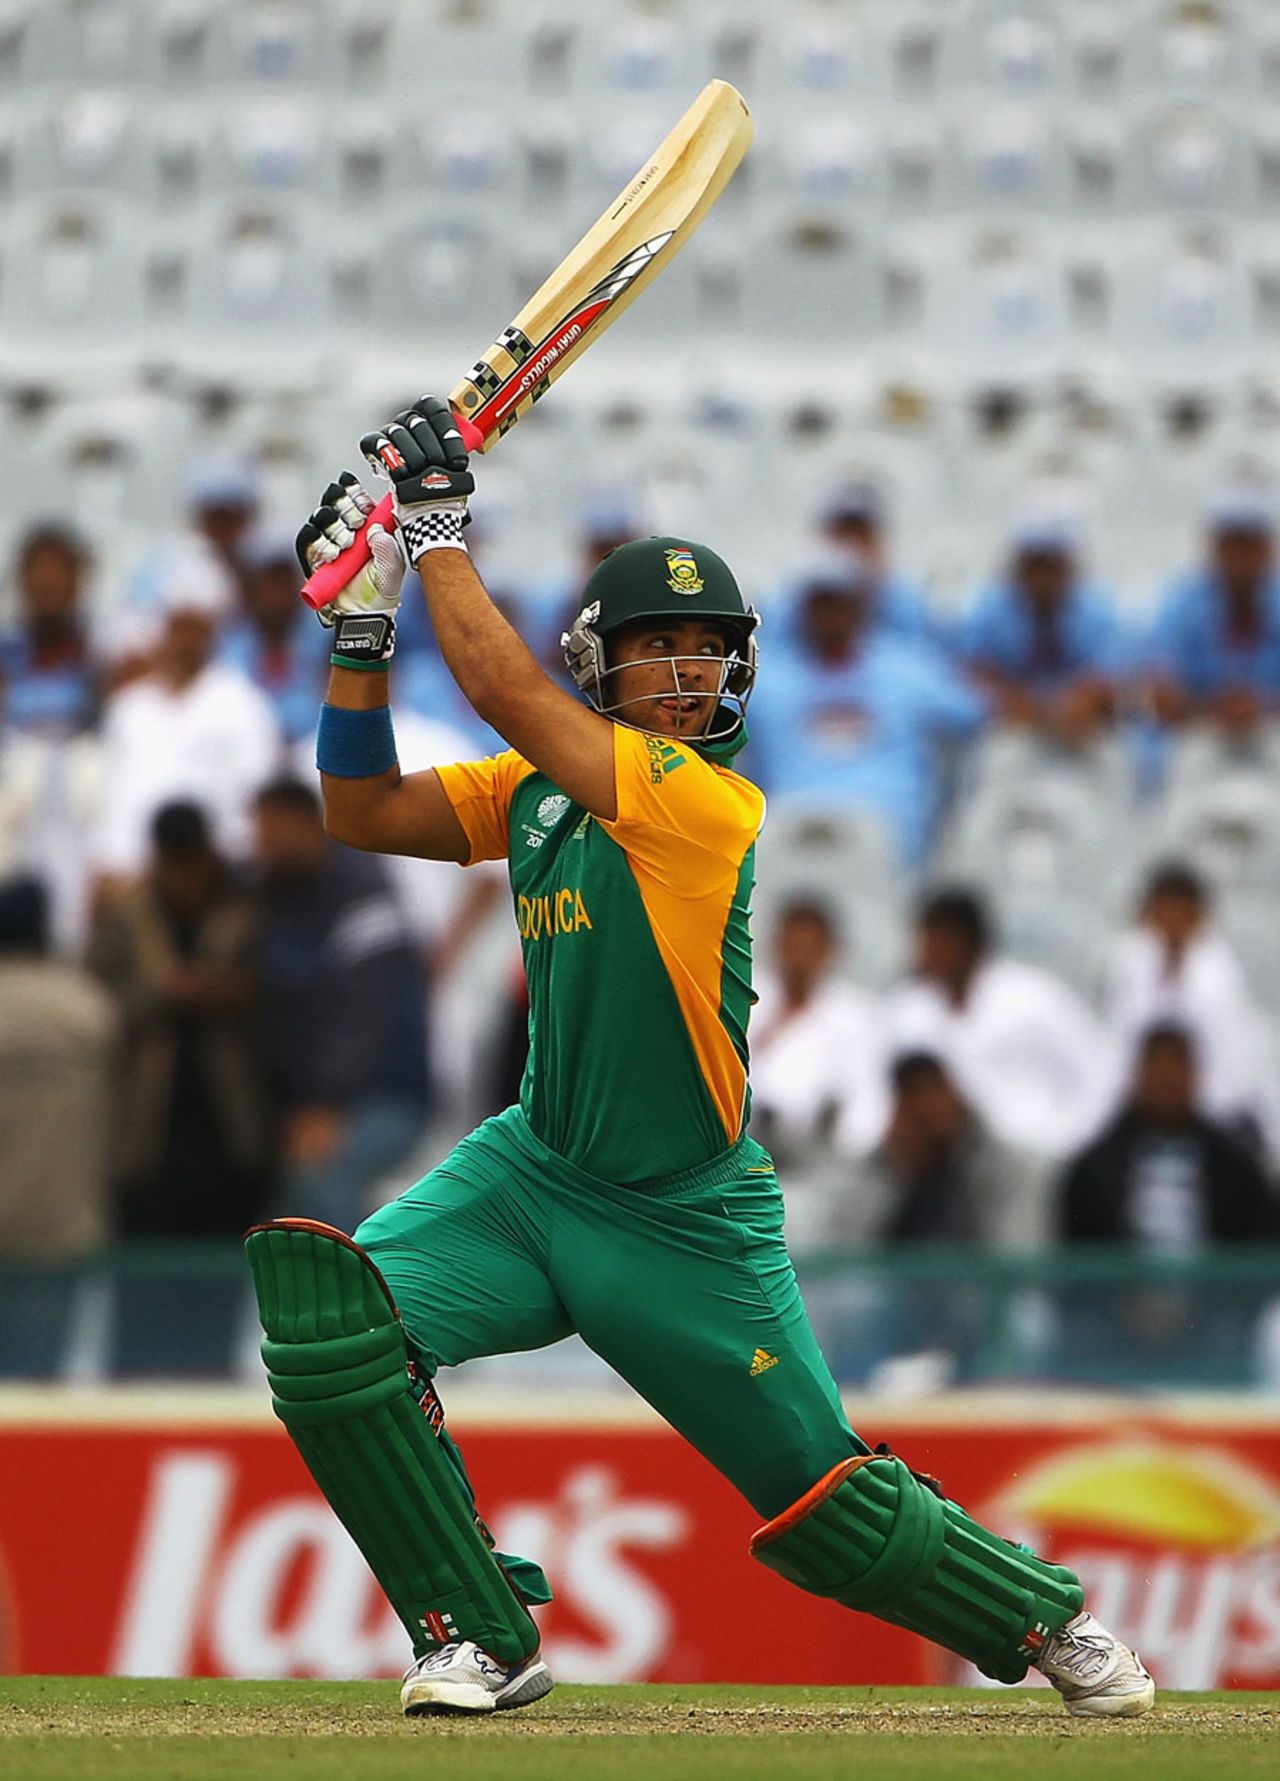 JP Duminy hits out during his 15-ball 40, Netherlands v South Africa, World Cup 2011, Mohali, March 3, 2011